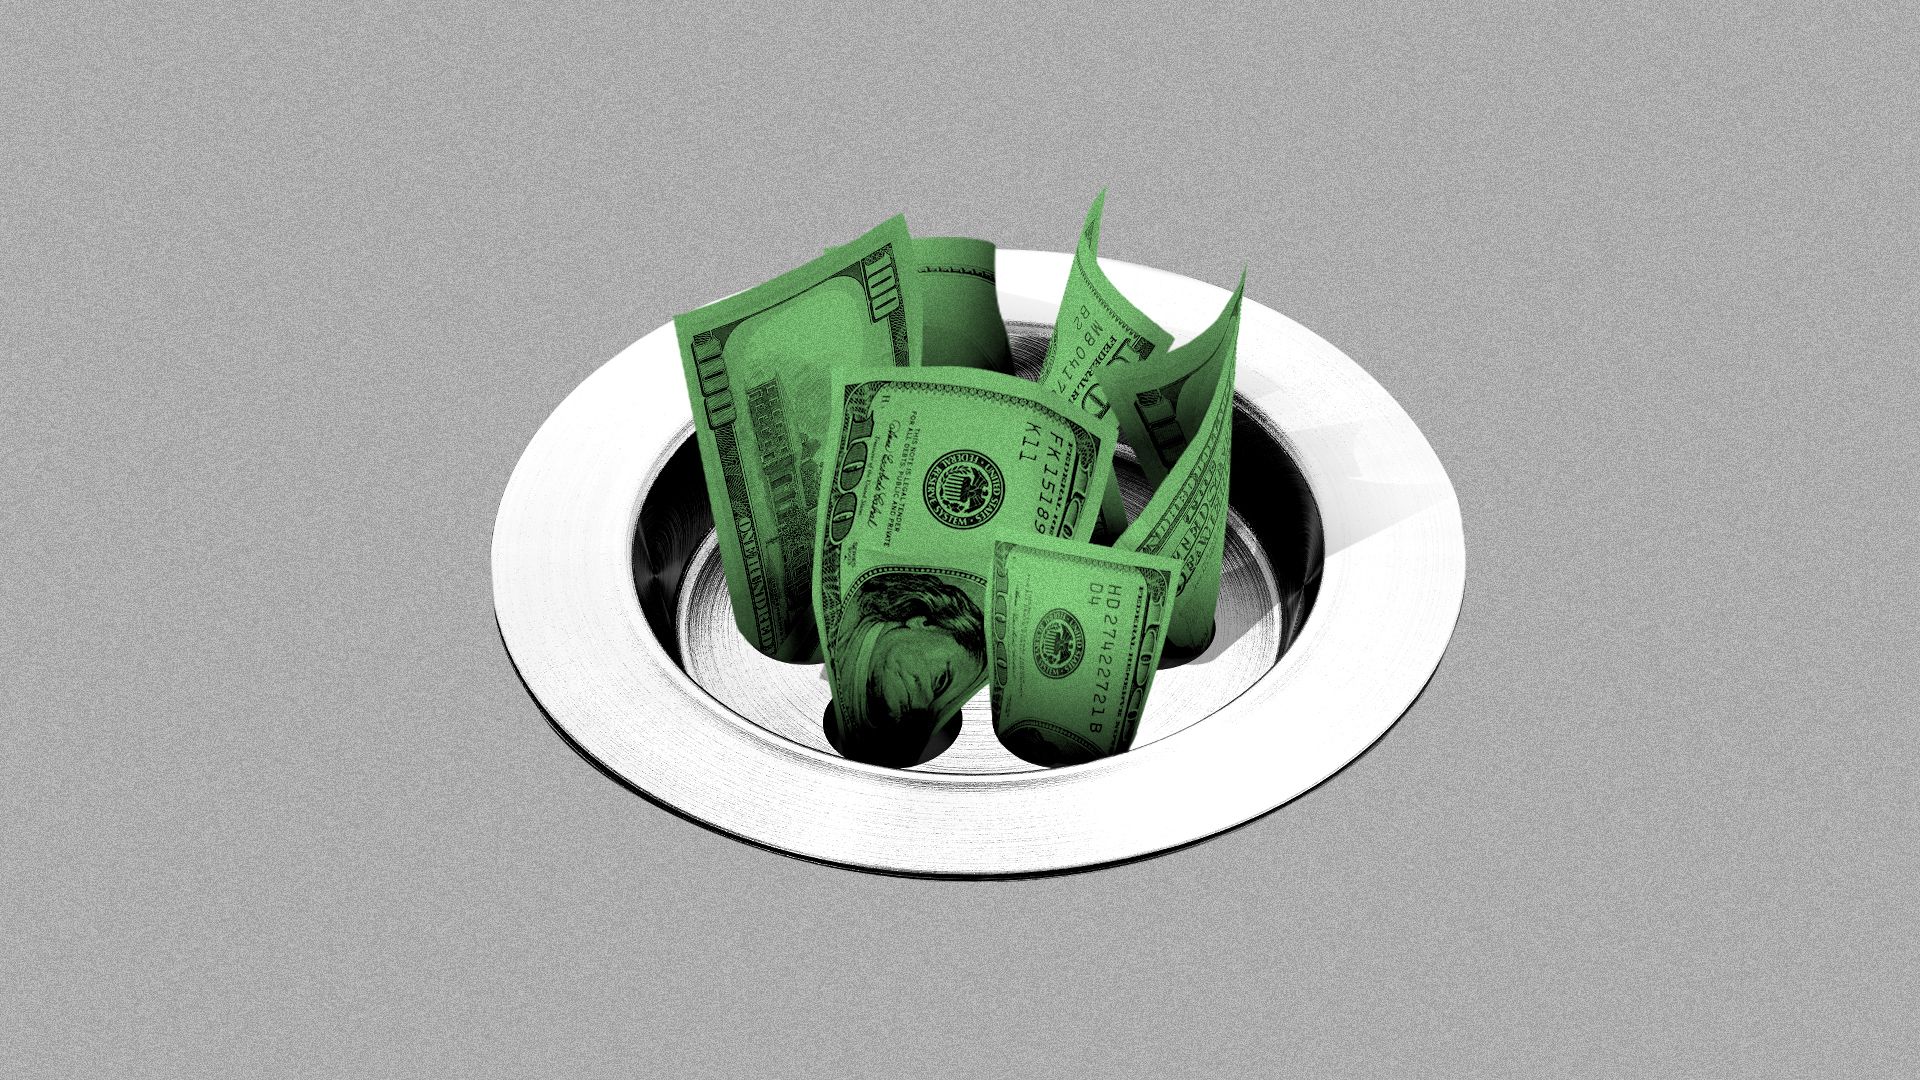 Illustration of a drain plugged up with cash.